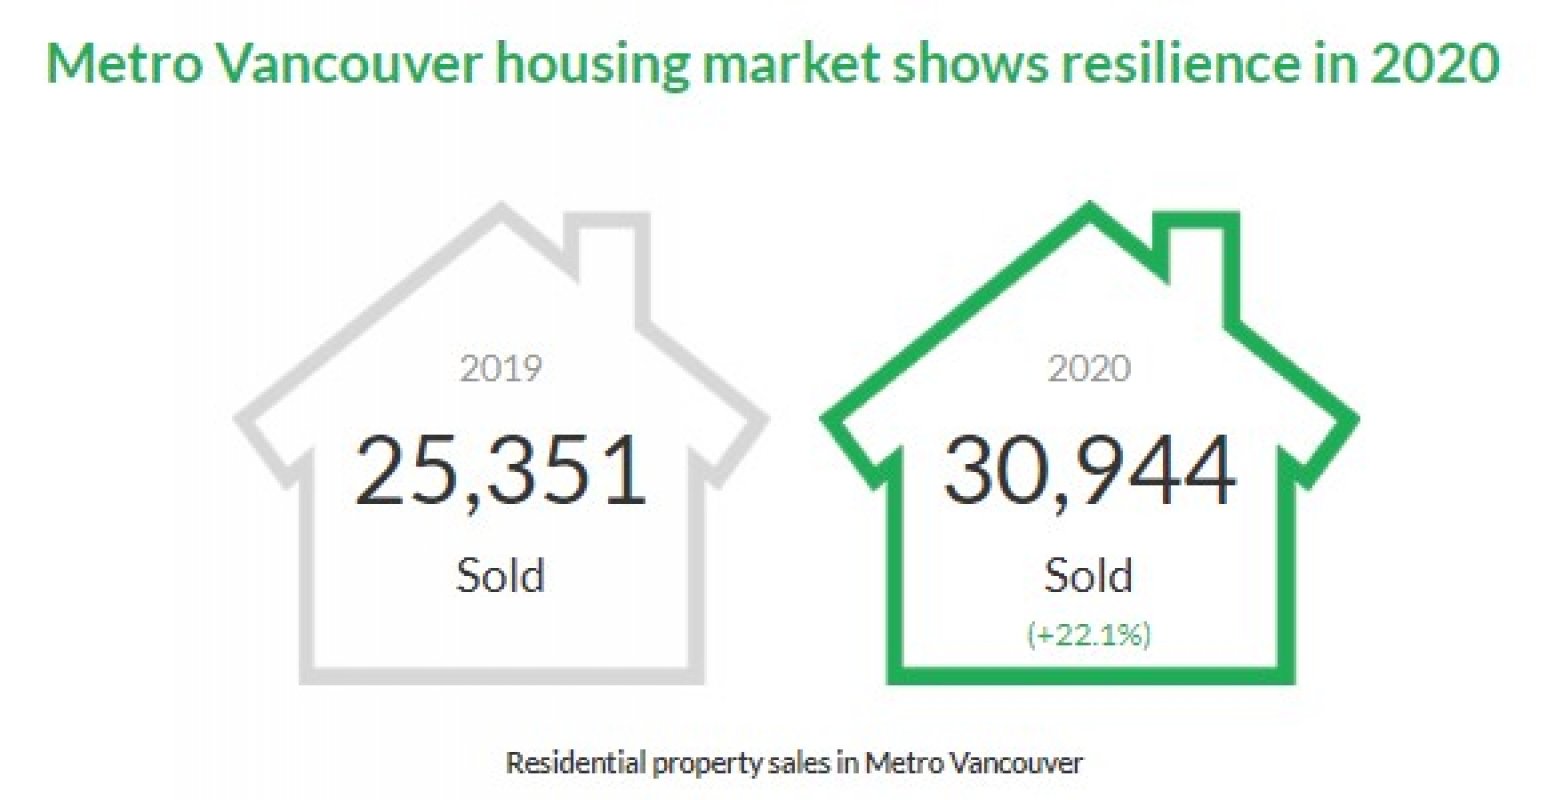 Metro Vancouver housing market shows resilience in 2020